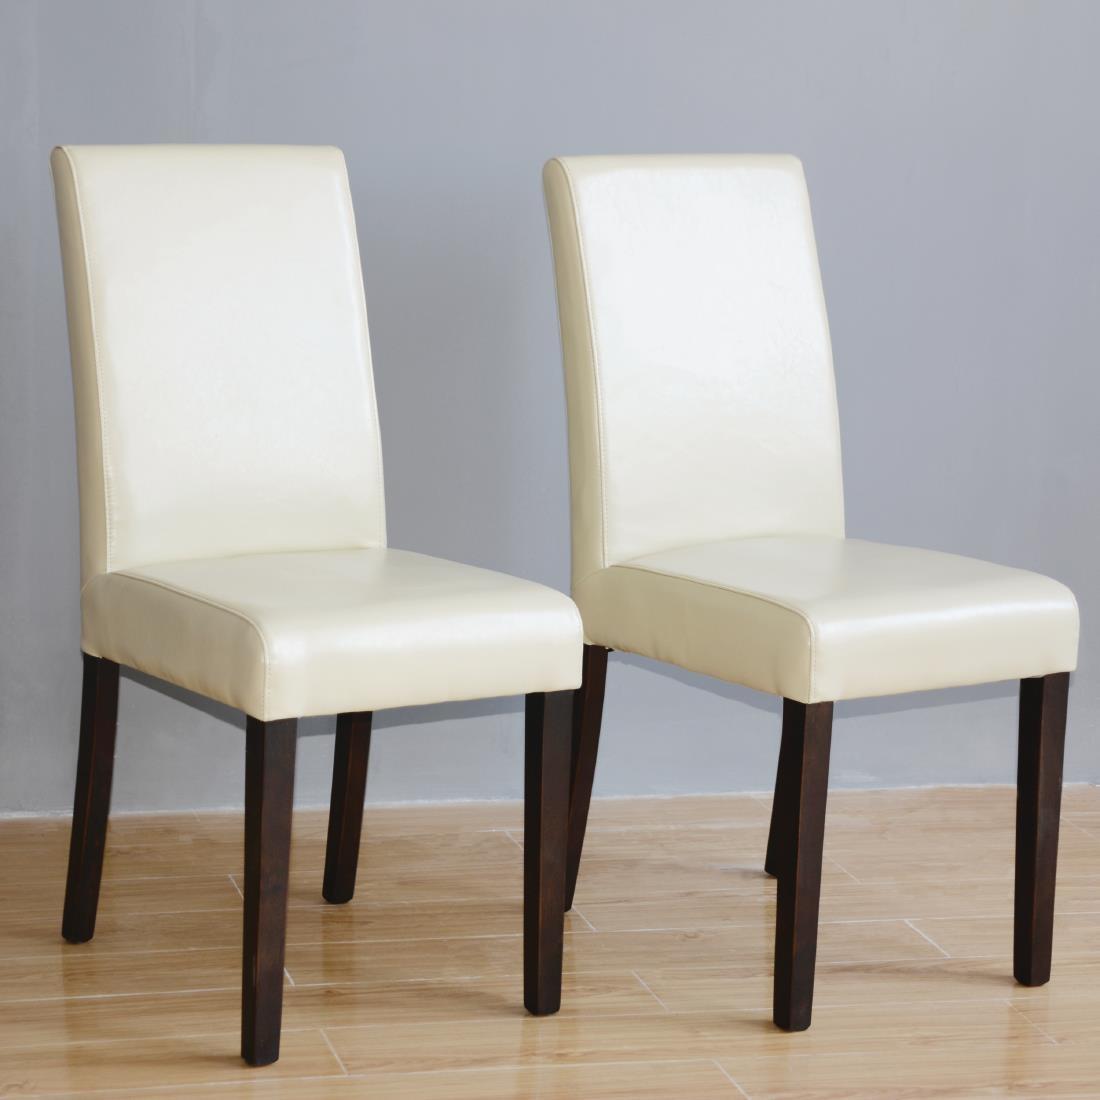 Bolero Faux Leather Dining Chairs Cream (Pack of 2) - GH444  - 5